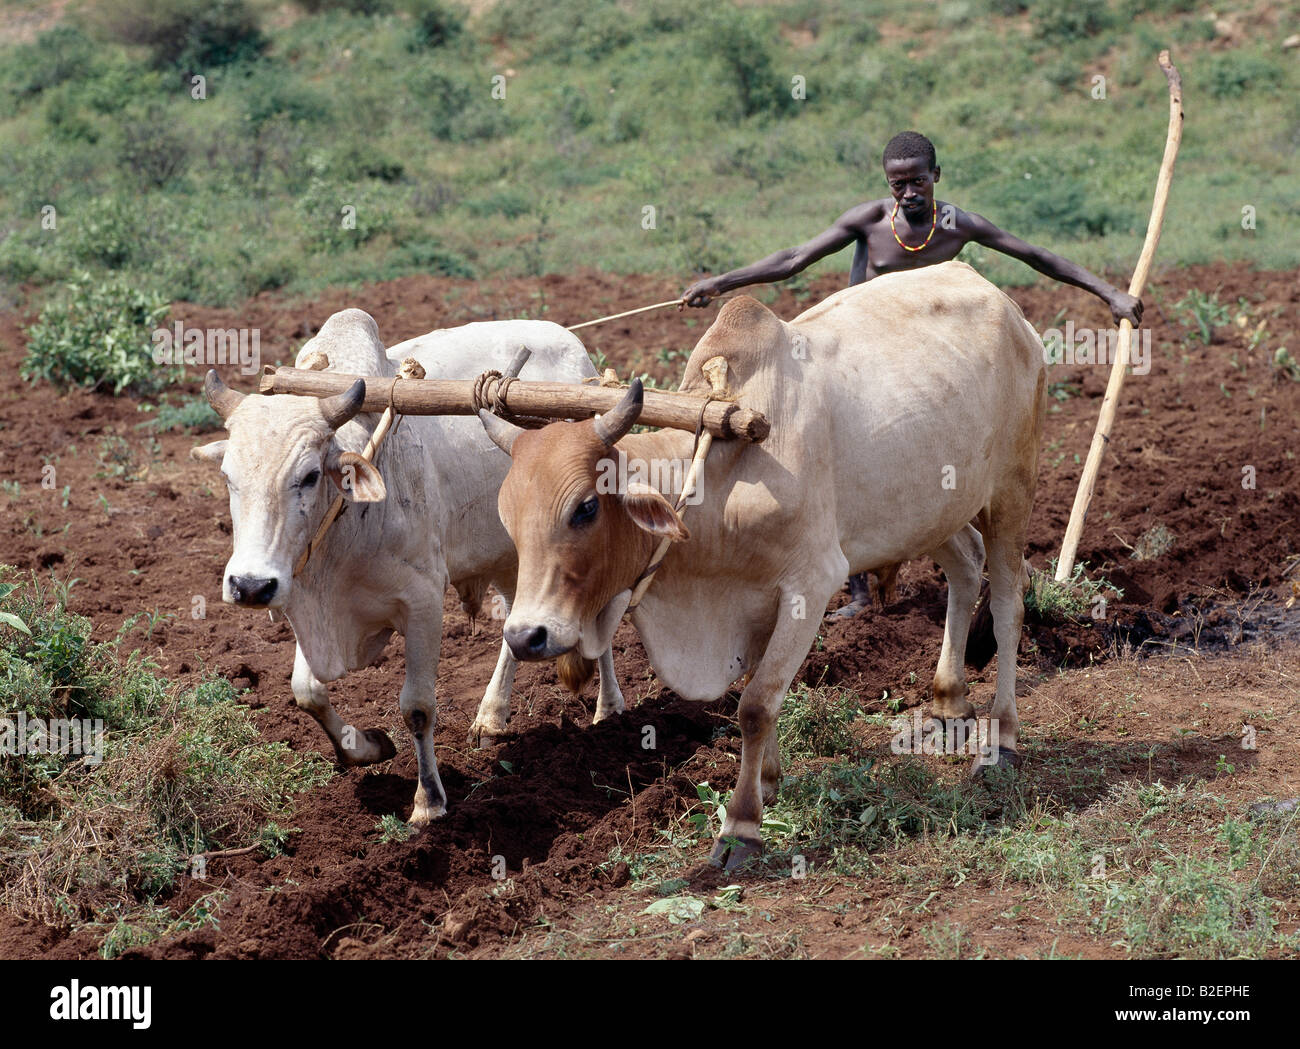 A Konso man ploughs his land with two yoked oxen. In the absence of modern farming methods, a wooden stave serves as his plough. Traditional agricultural methods are widely used in Ethiopia.. Stock Photo